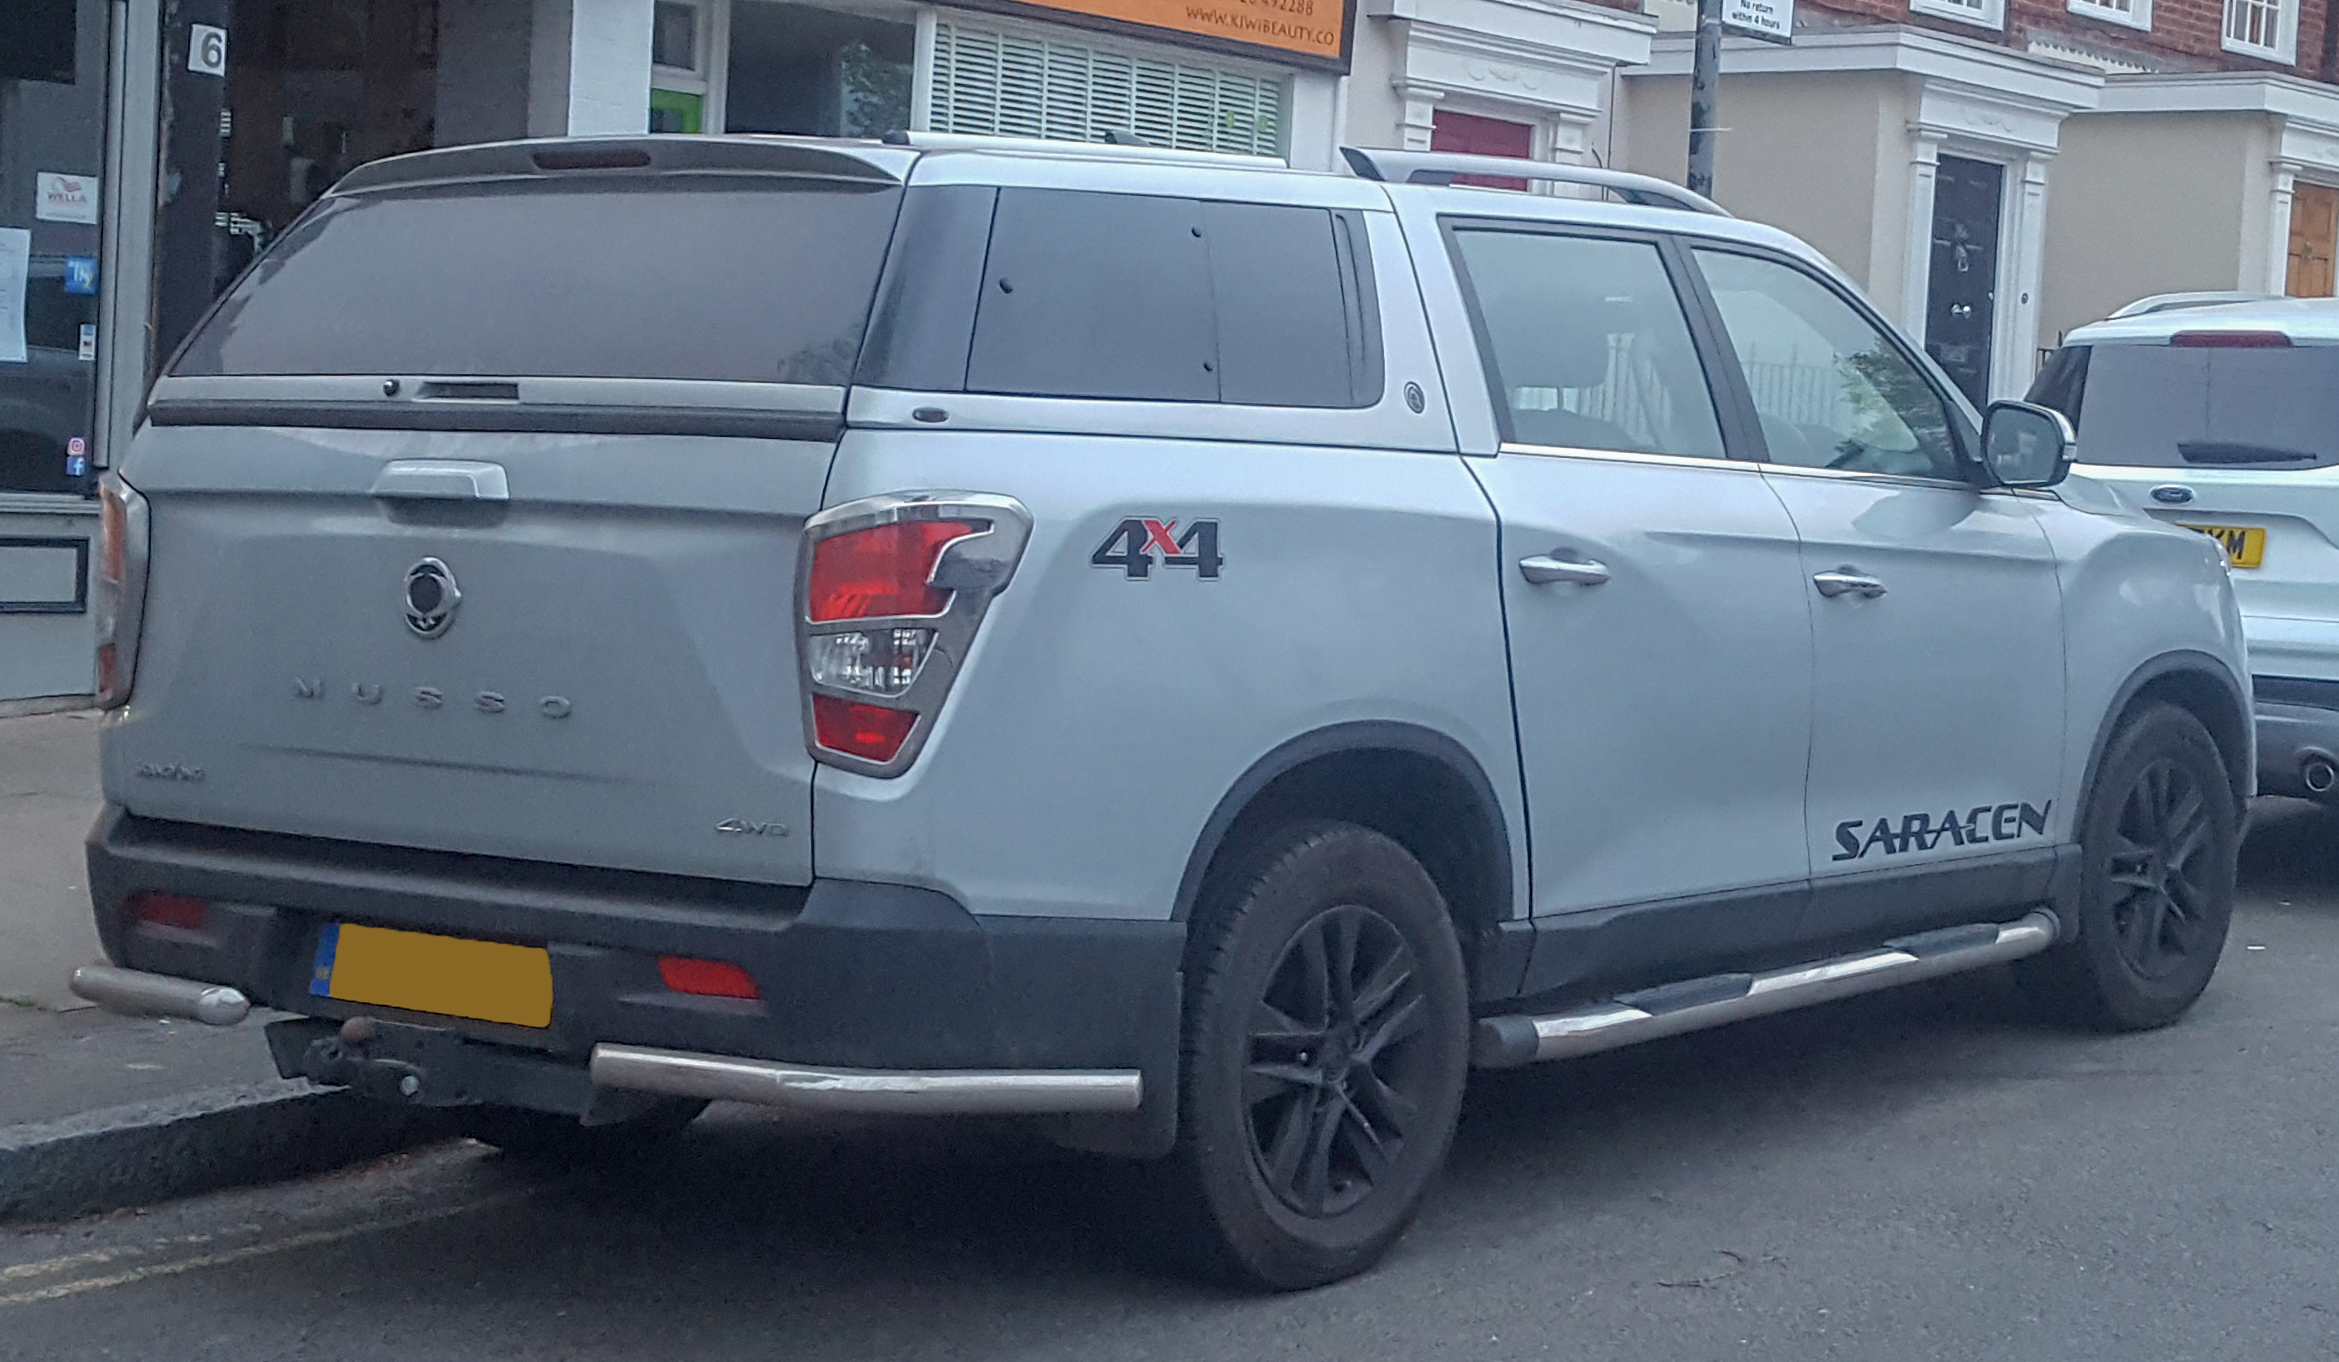 File:2018 Ssangyong Musso Saracen Automatic 2.2 Rear.jpg - Wikipedia